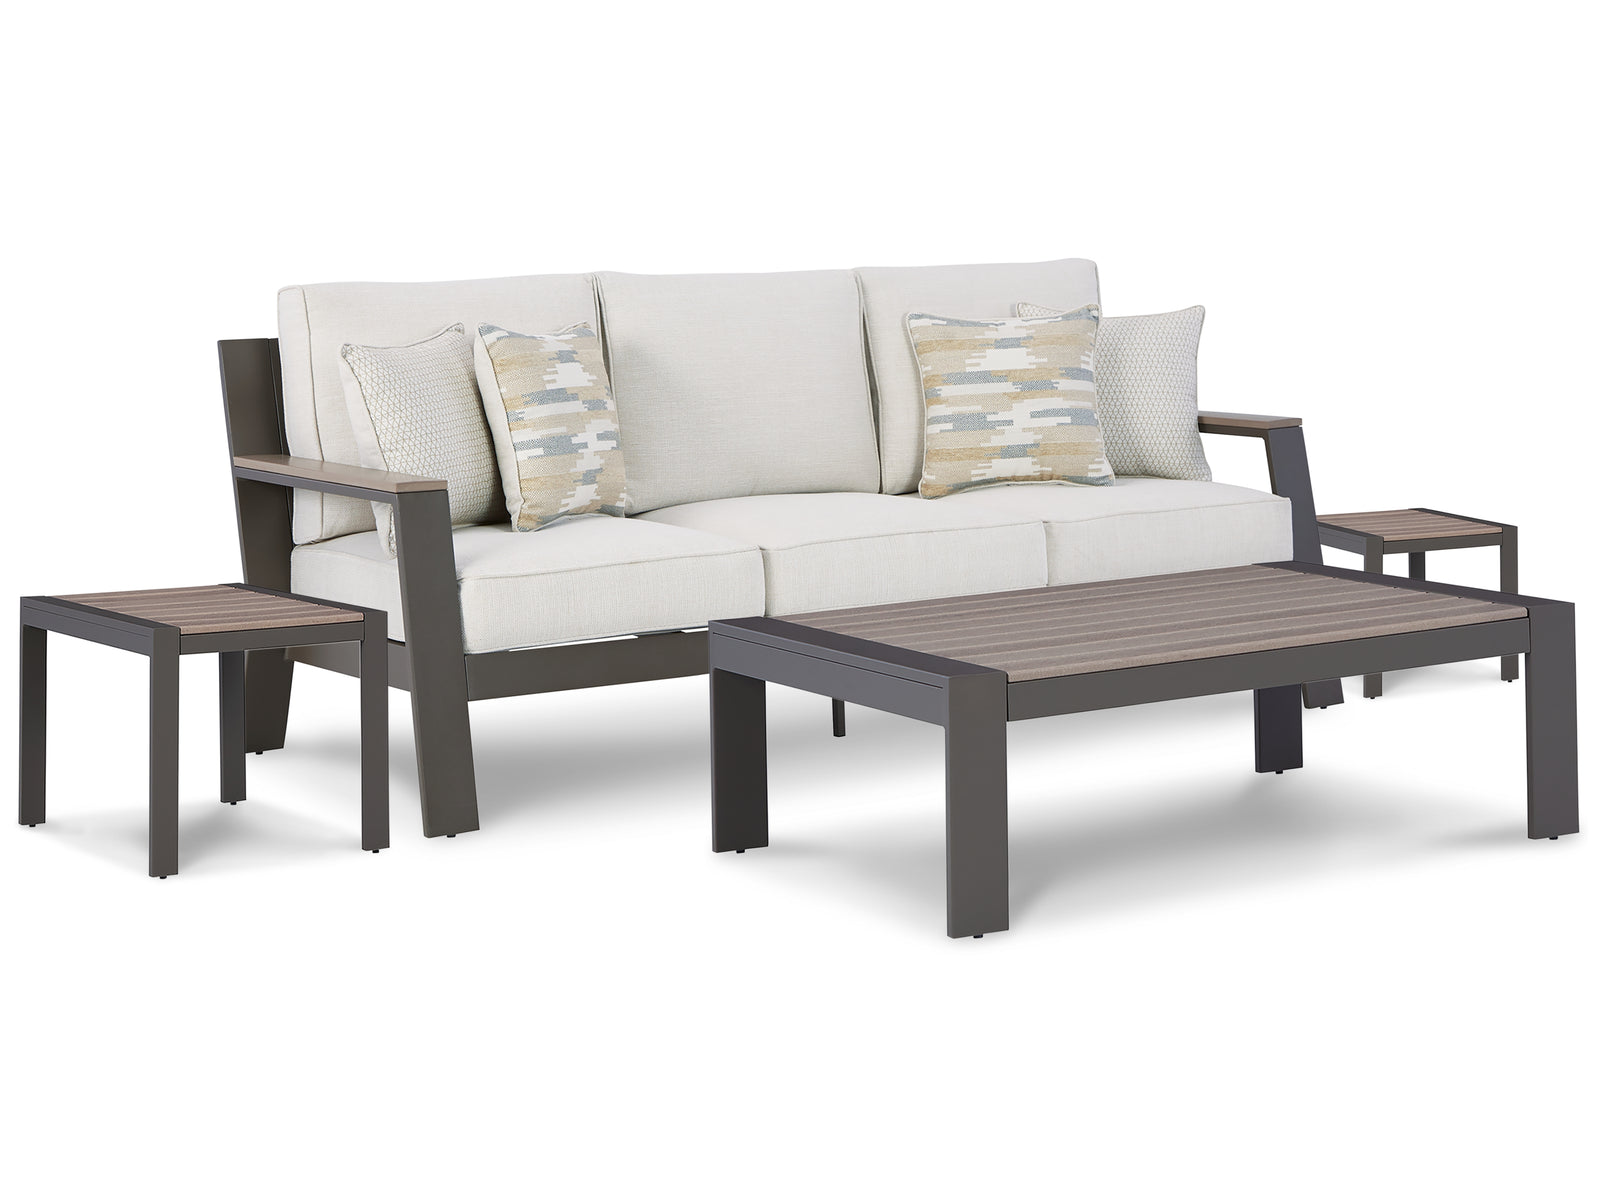 Tropicava Taupe/white Outdoor Sofa With Coffee Table And 2 End Tables